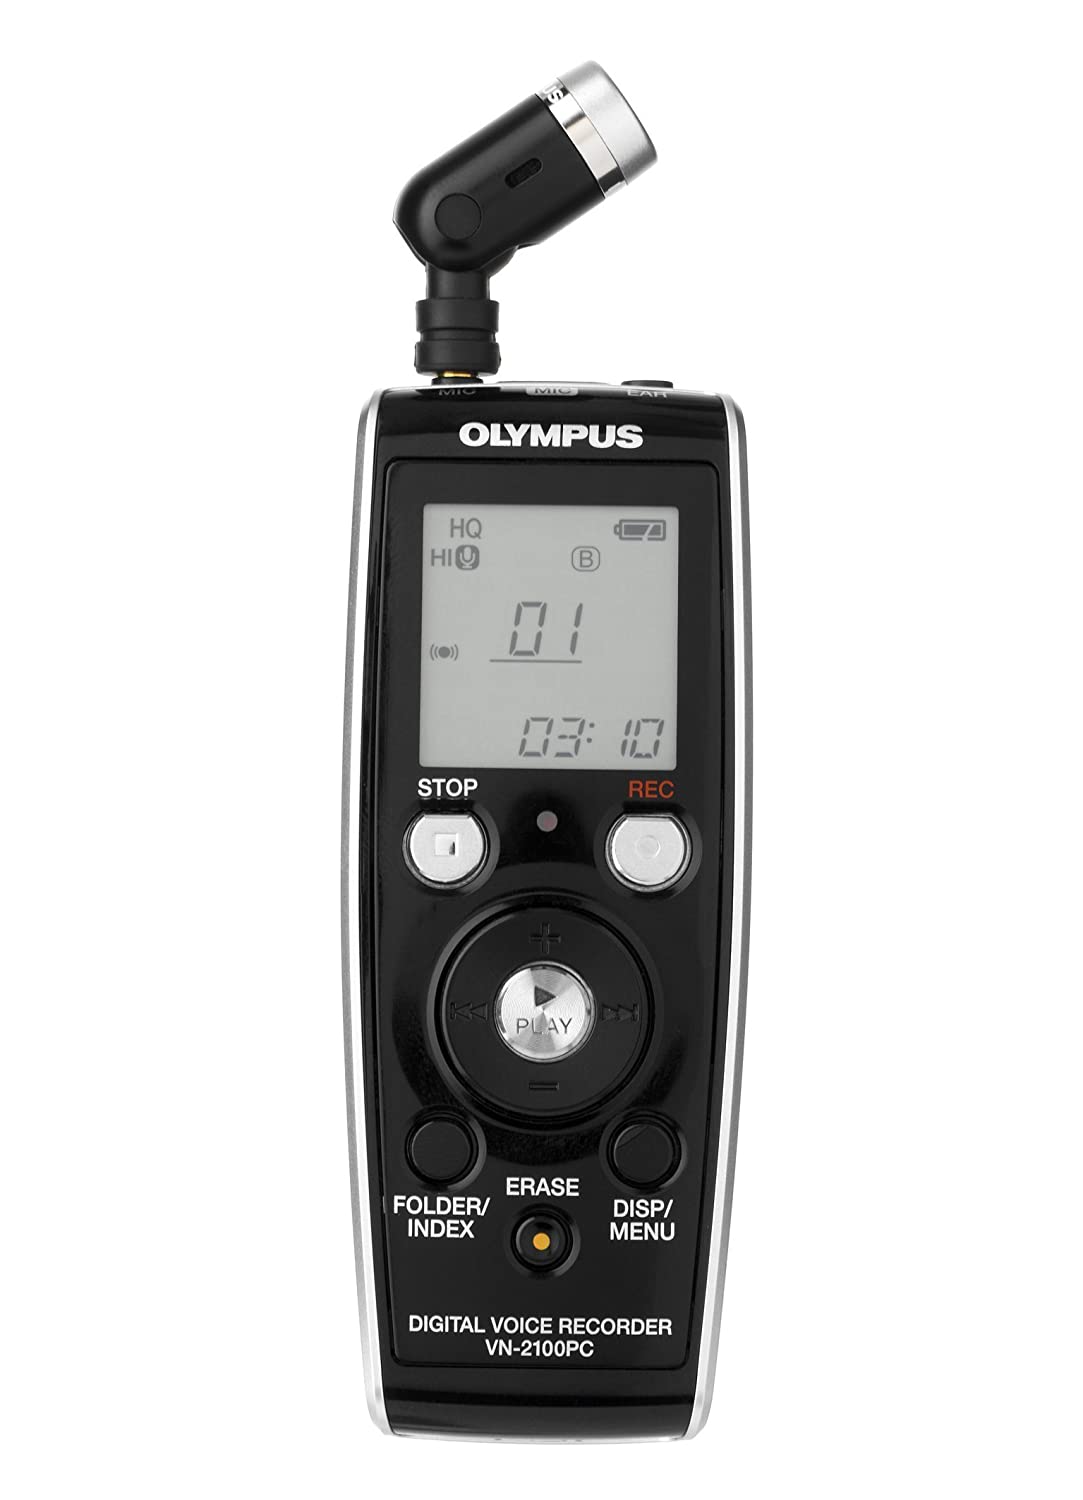 Olympus digital voice recorder vn 1100pc drivers for mac